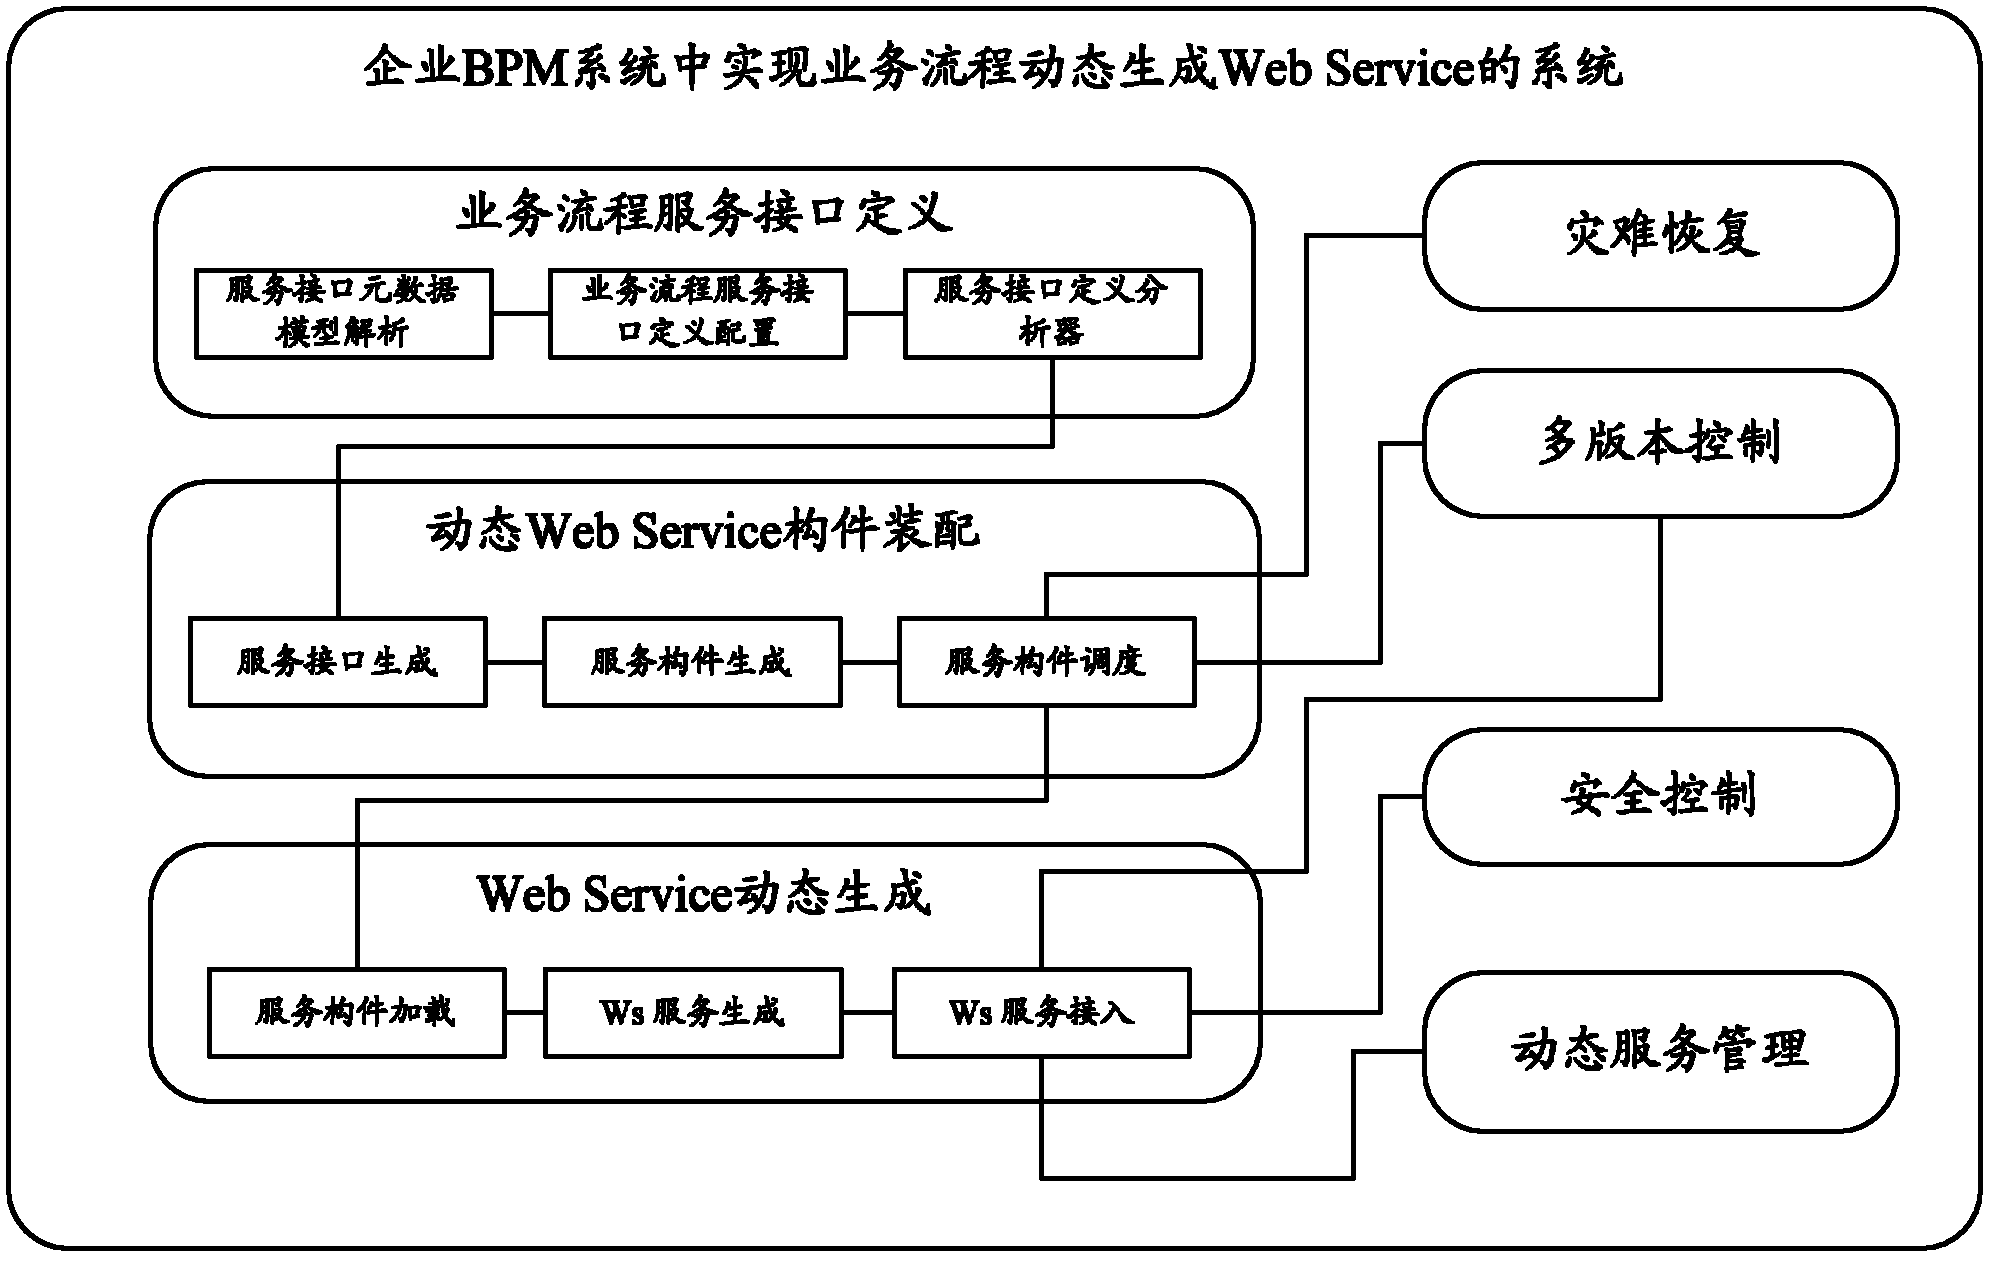 System and method for dynamically generating web service by business process in bpm